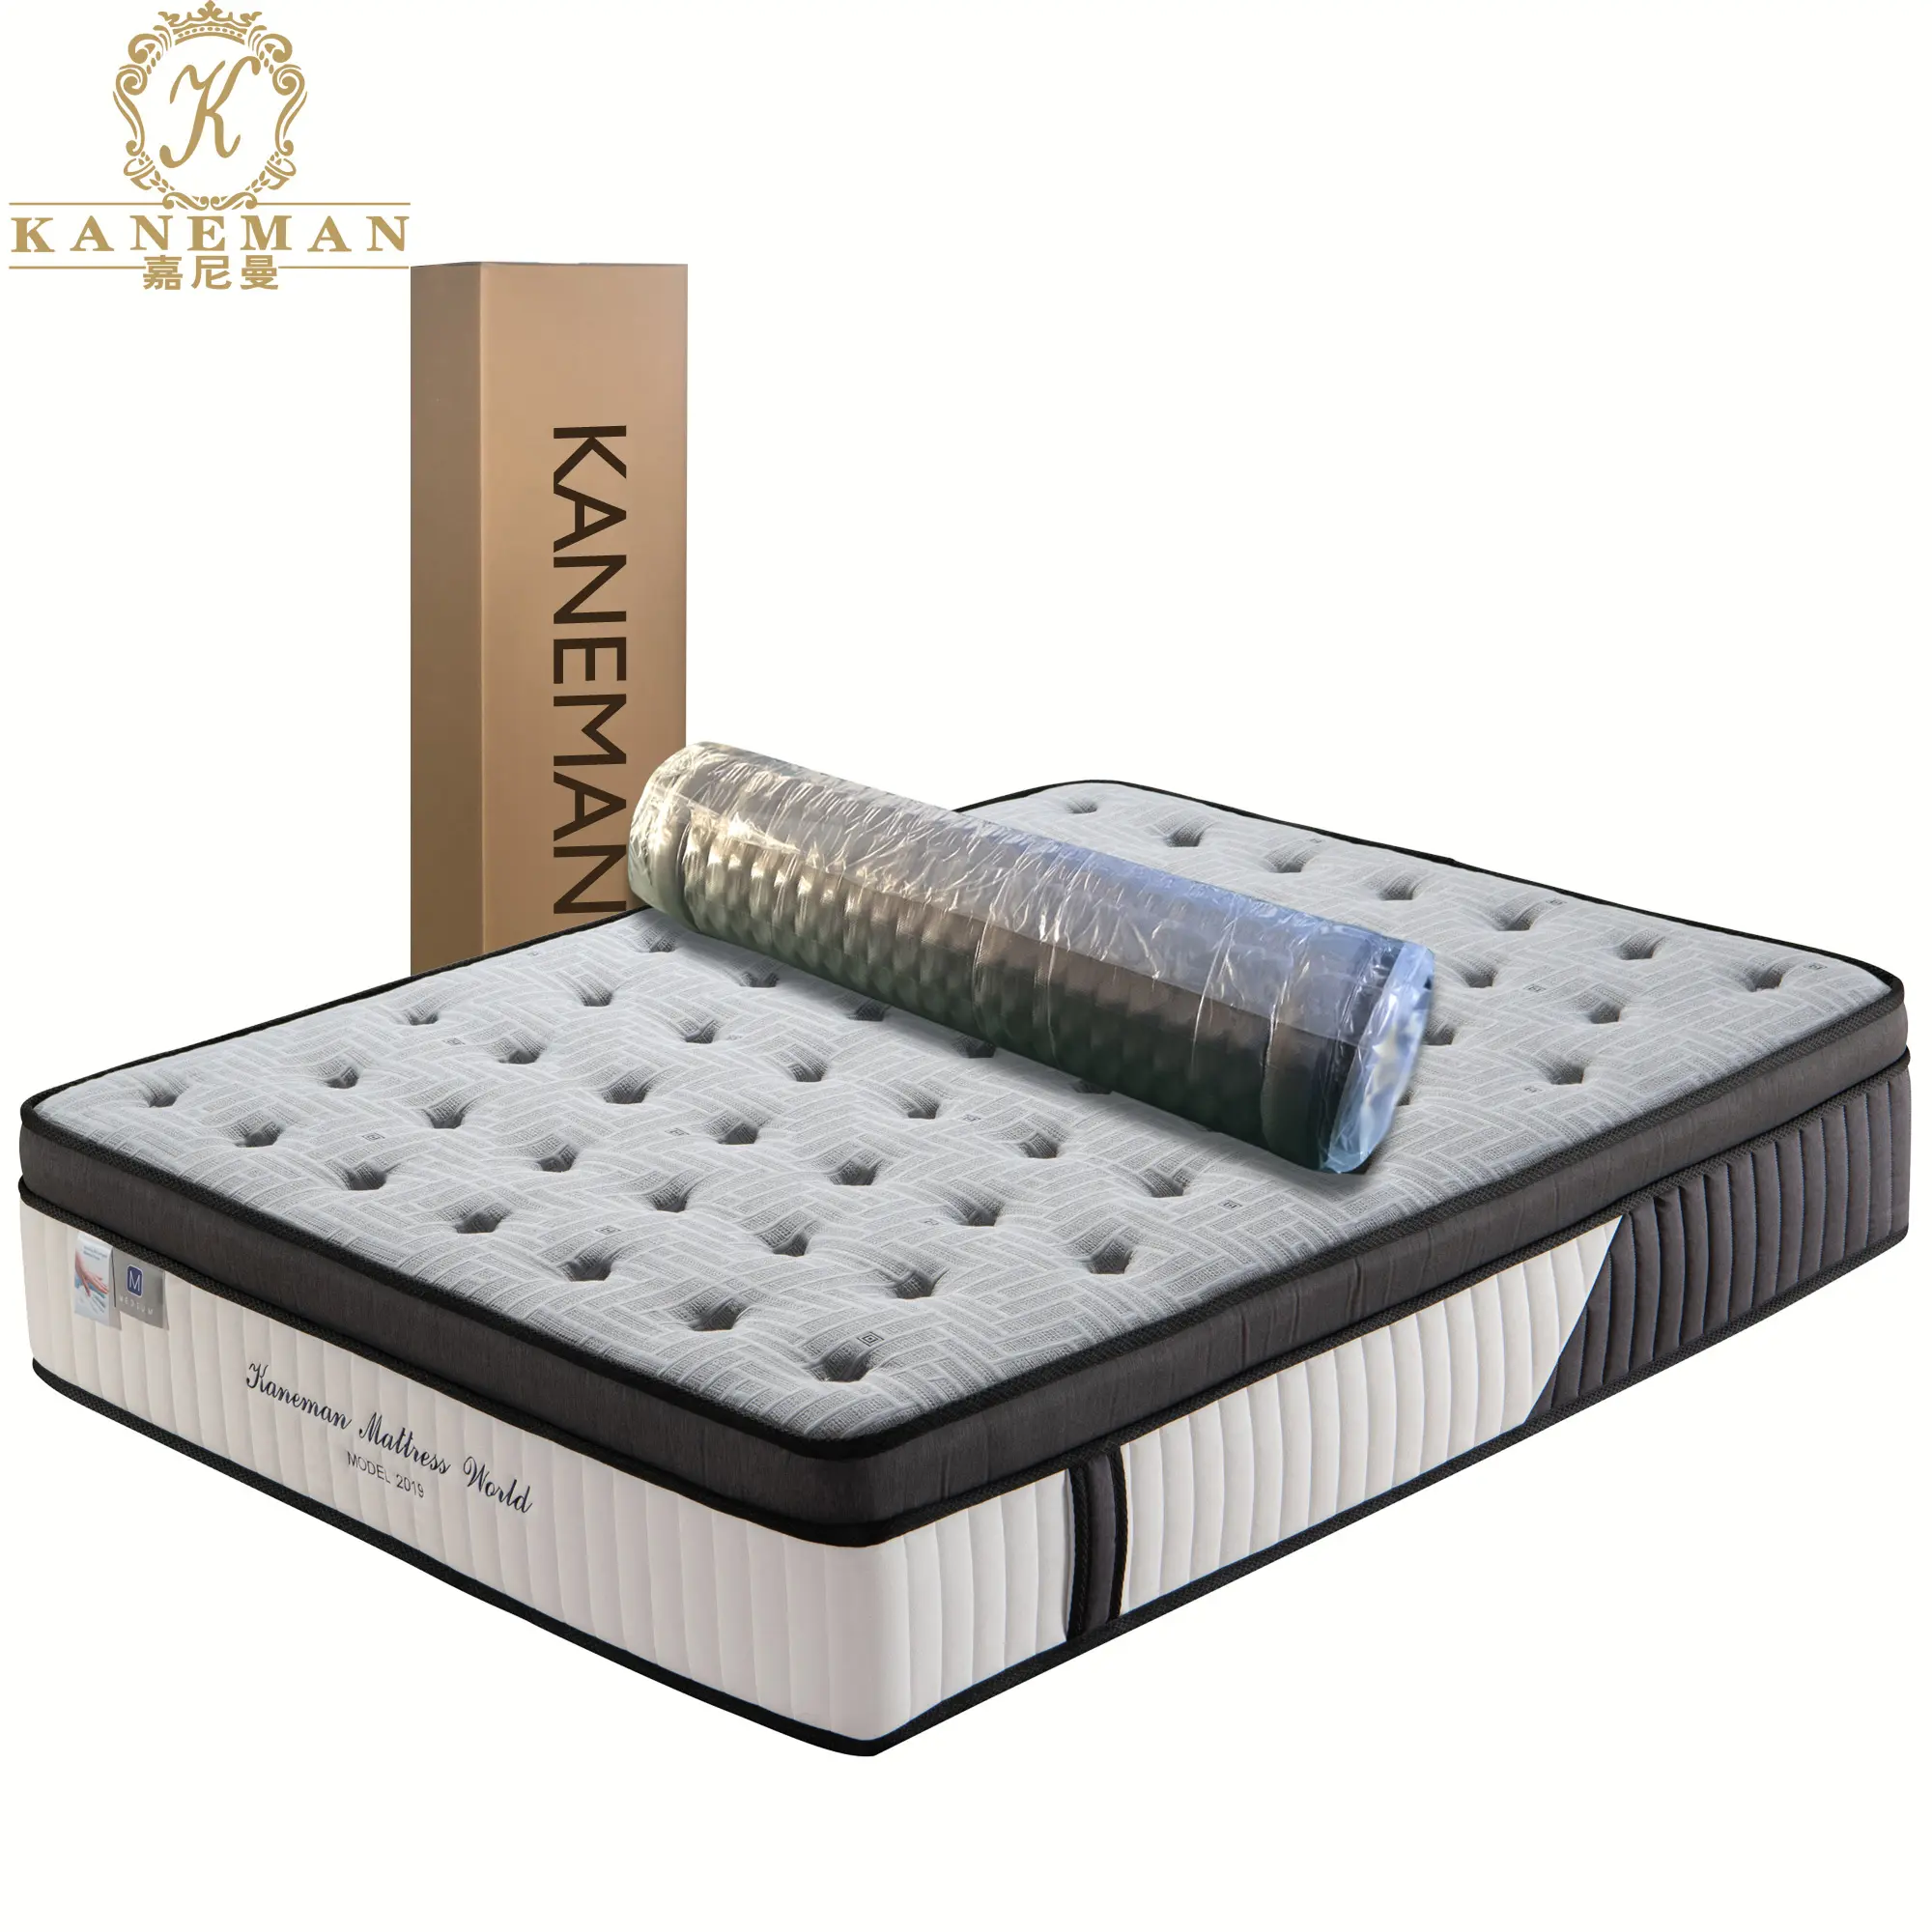 13 Inch Vacuum Roll Up Packing Wholesale Queen King Size Memory Foam Pocket Spring Mattress In A Box